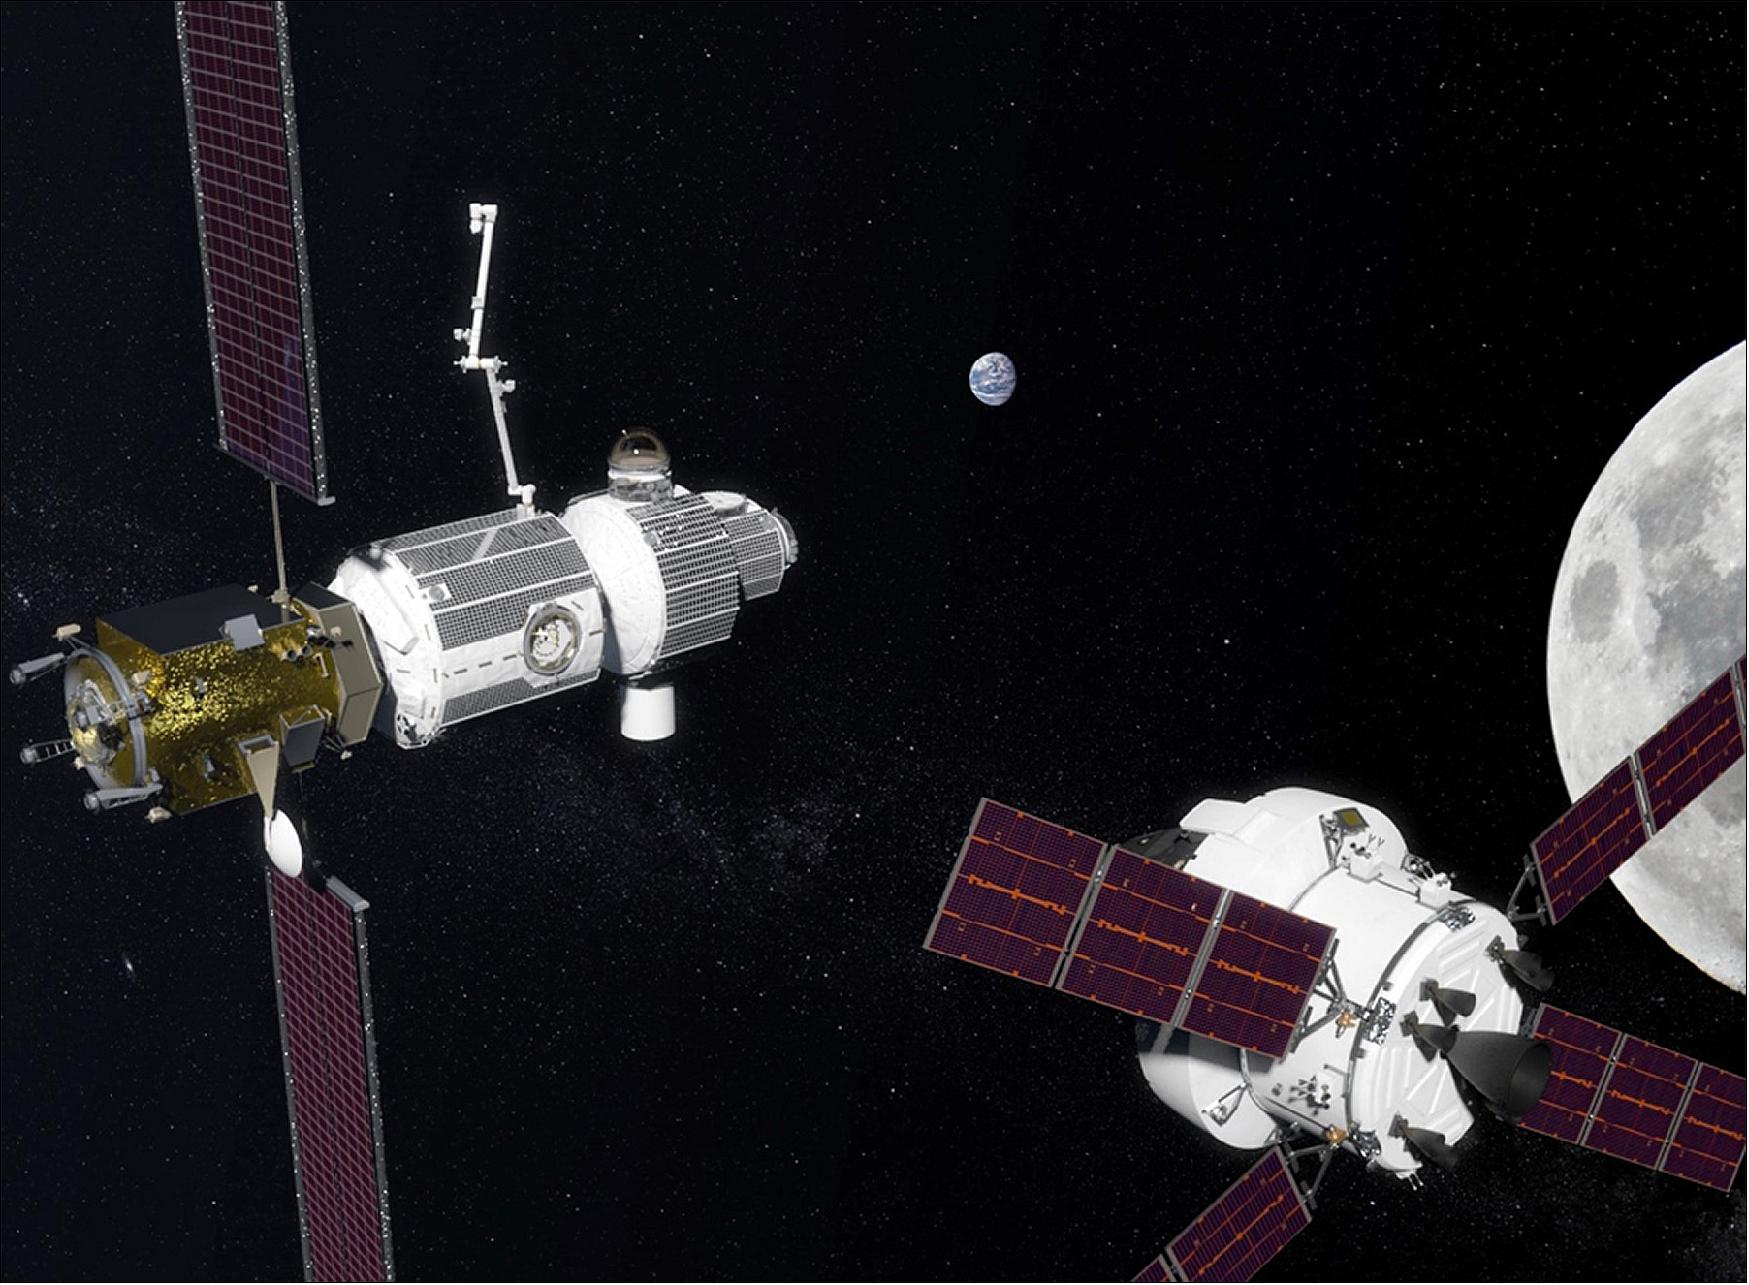 Figure 1: NASA's Lunar Outpost will Extend Human Presence in Deep Space (image credit: NASA)